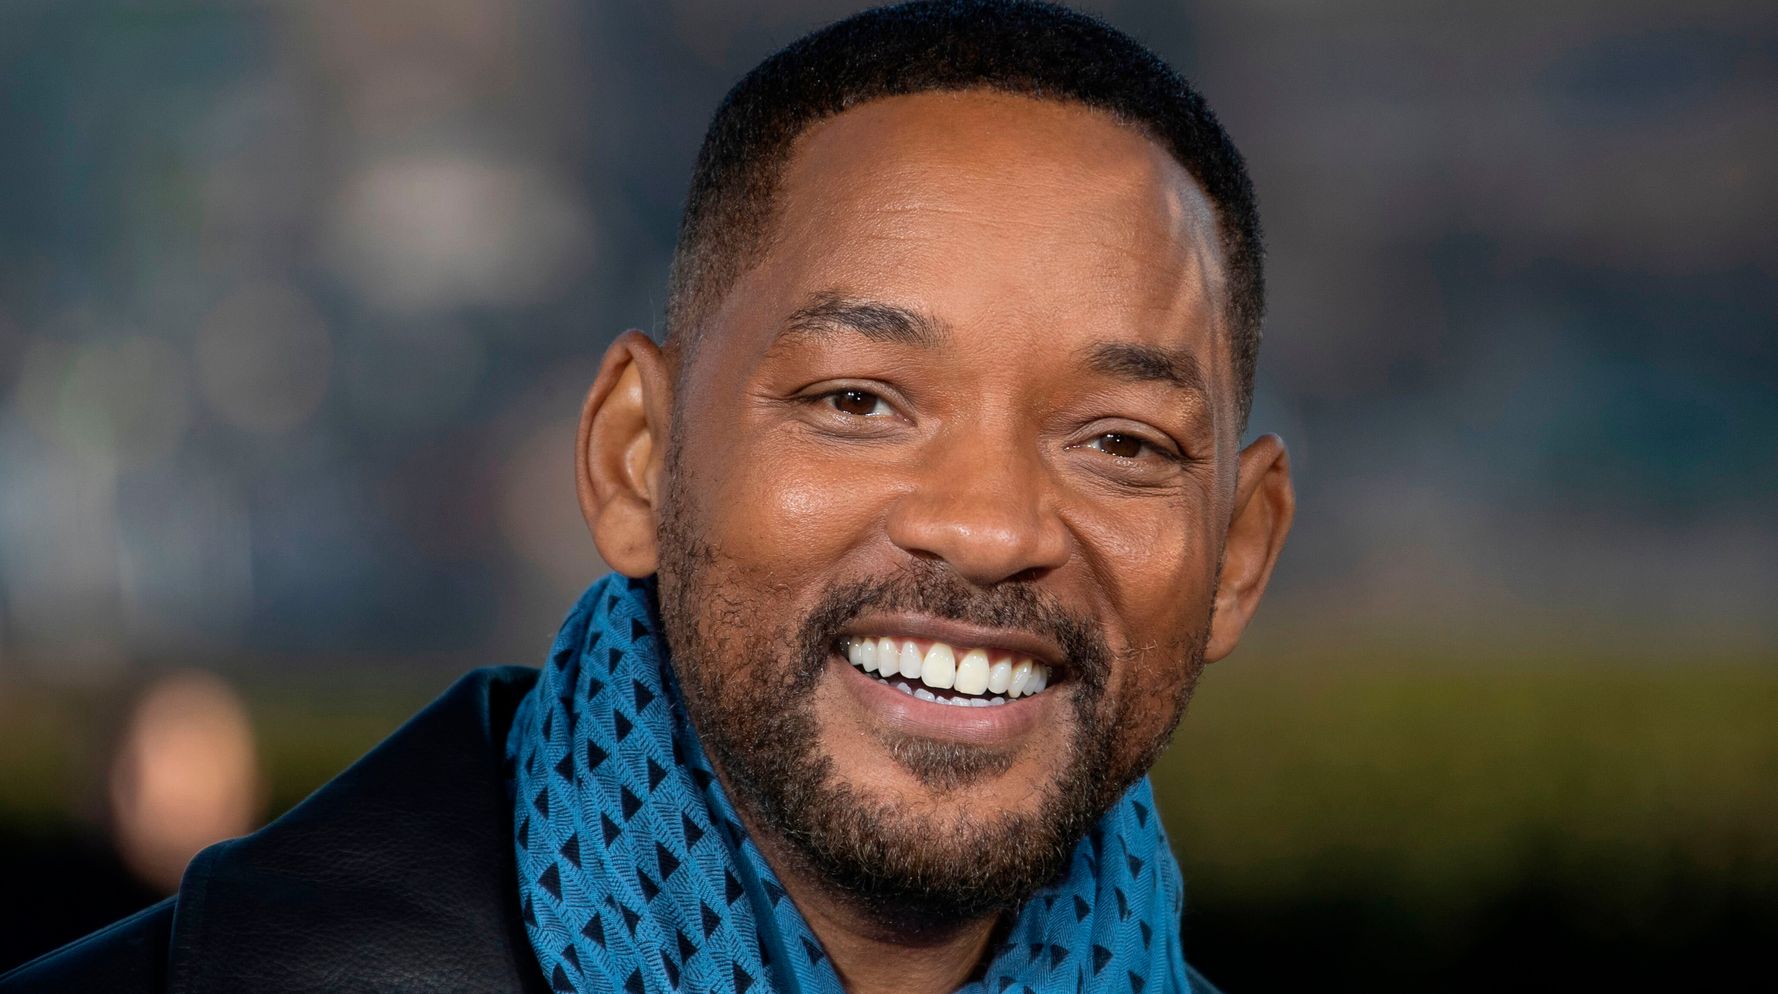 Will Smith Introduces Star Of 'Fresh Prince Of Bel-Air' Revival